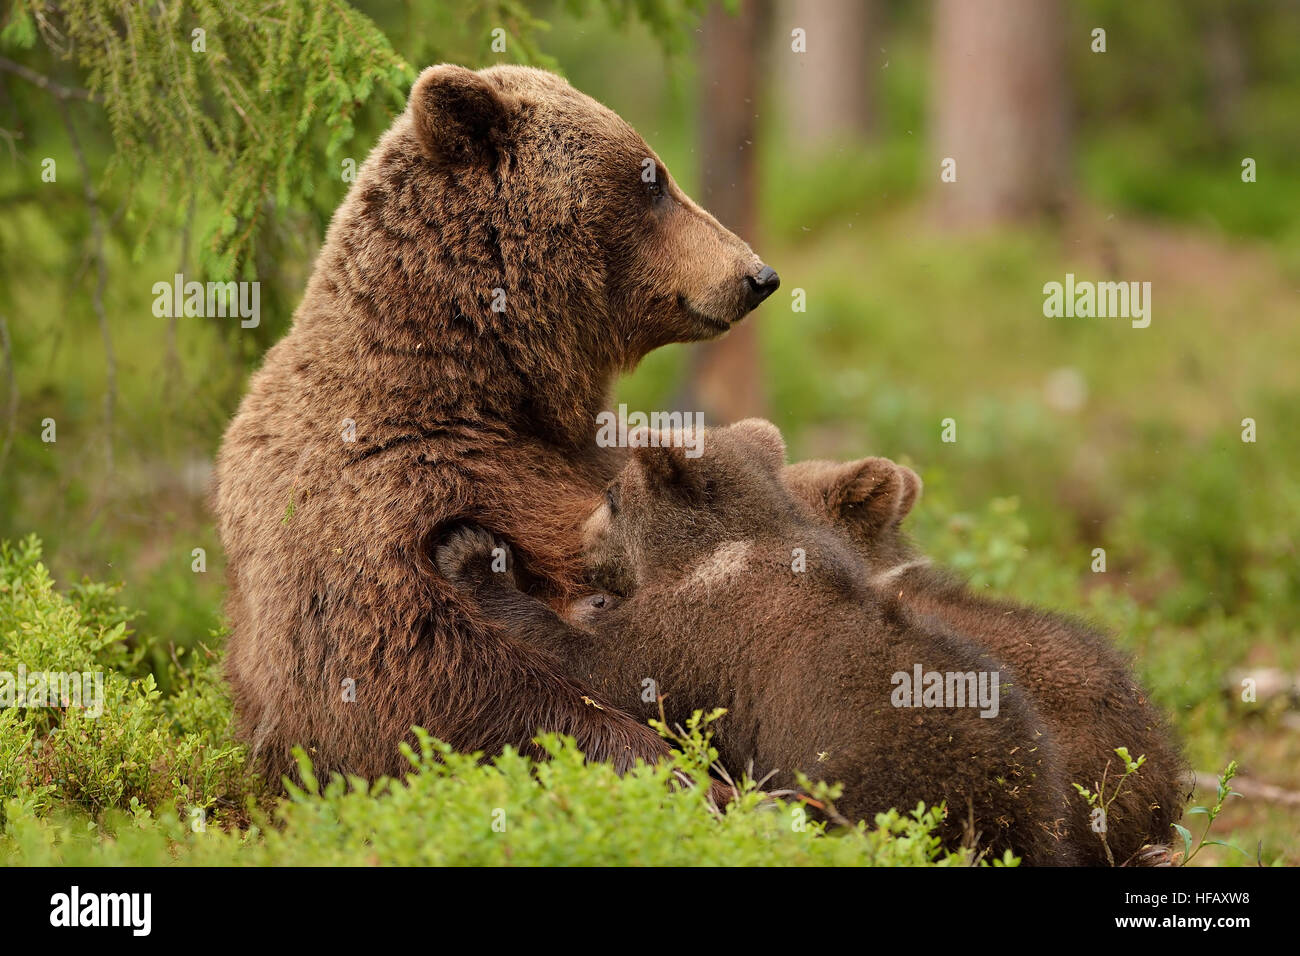 Brown bear suckling cubs in forest. Bear breastfeeding cubs. Stock Photo